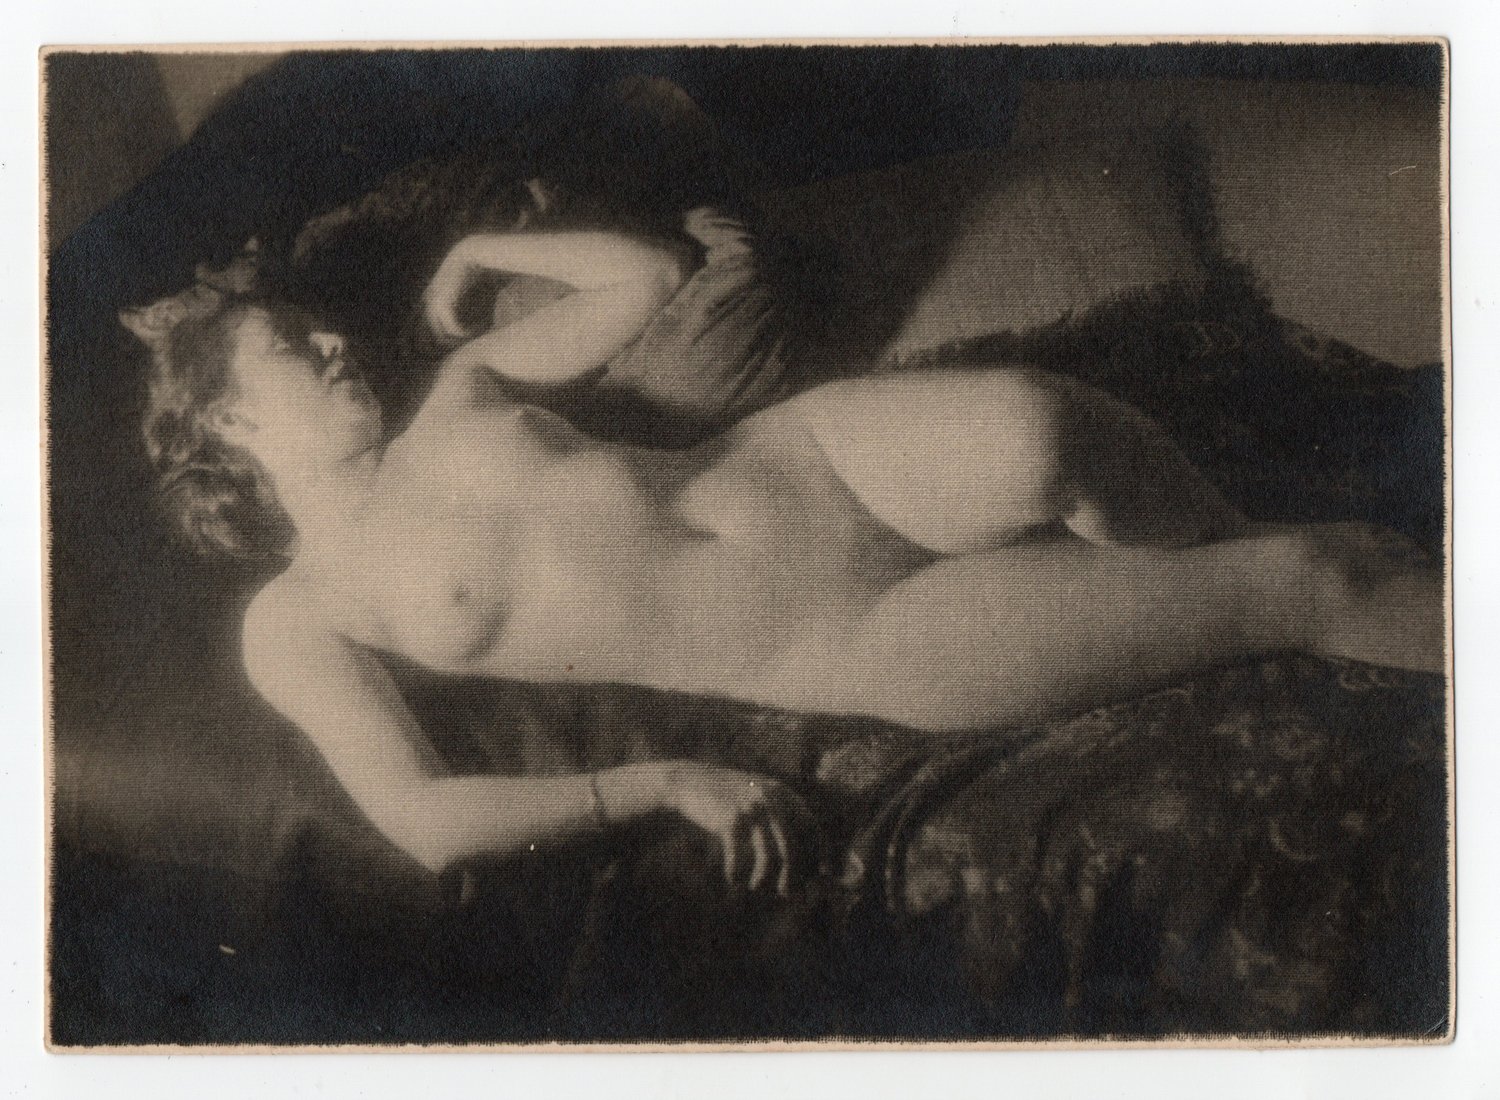 Image of Anonyme: an artistic nude study, Pictorialism ca. 1940s